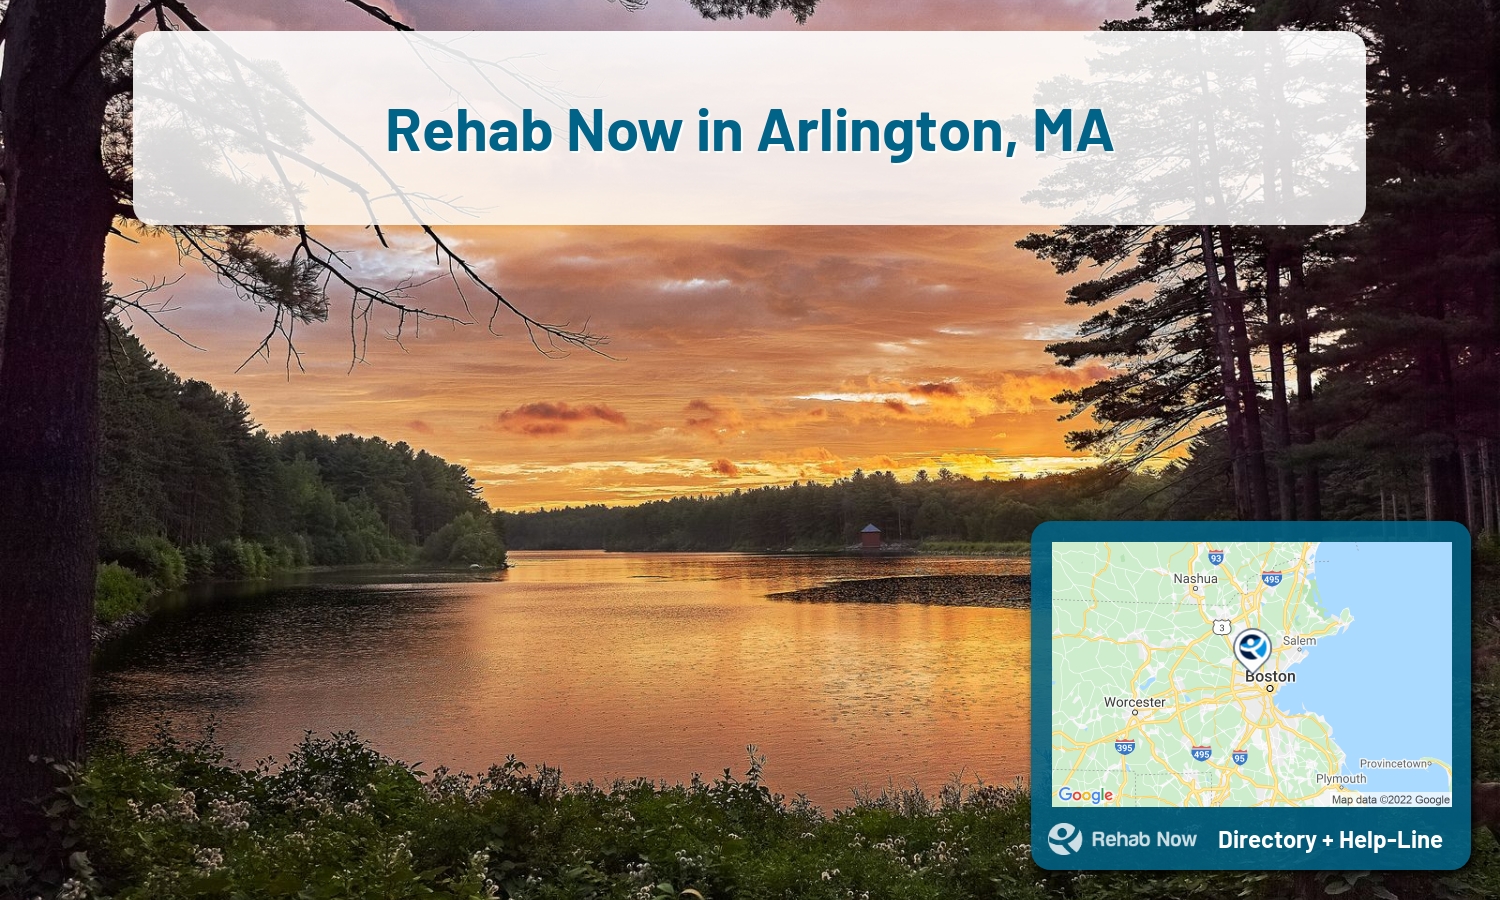 Drug rehab and alcohol treatment services nearby Arlington, MA. Need help choosing a treatment program? Call our free hotline!